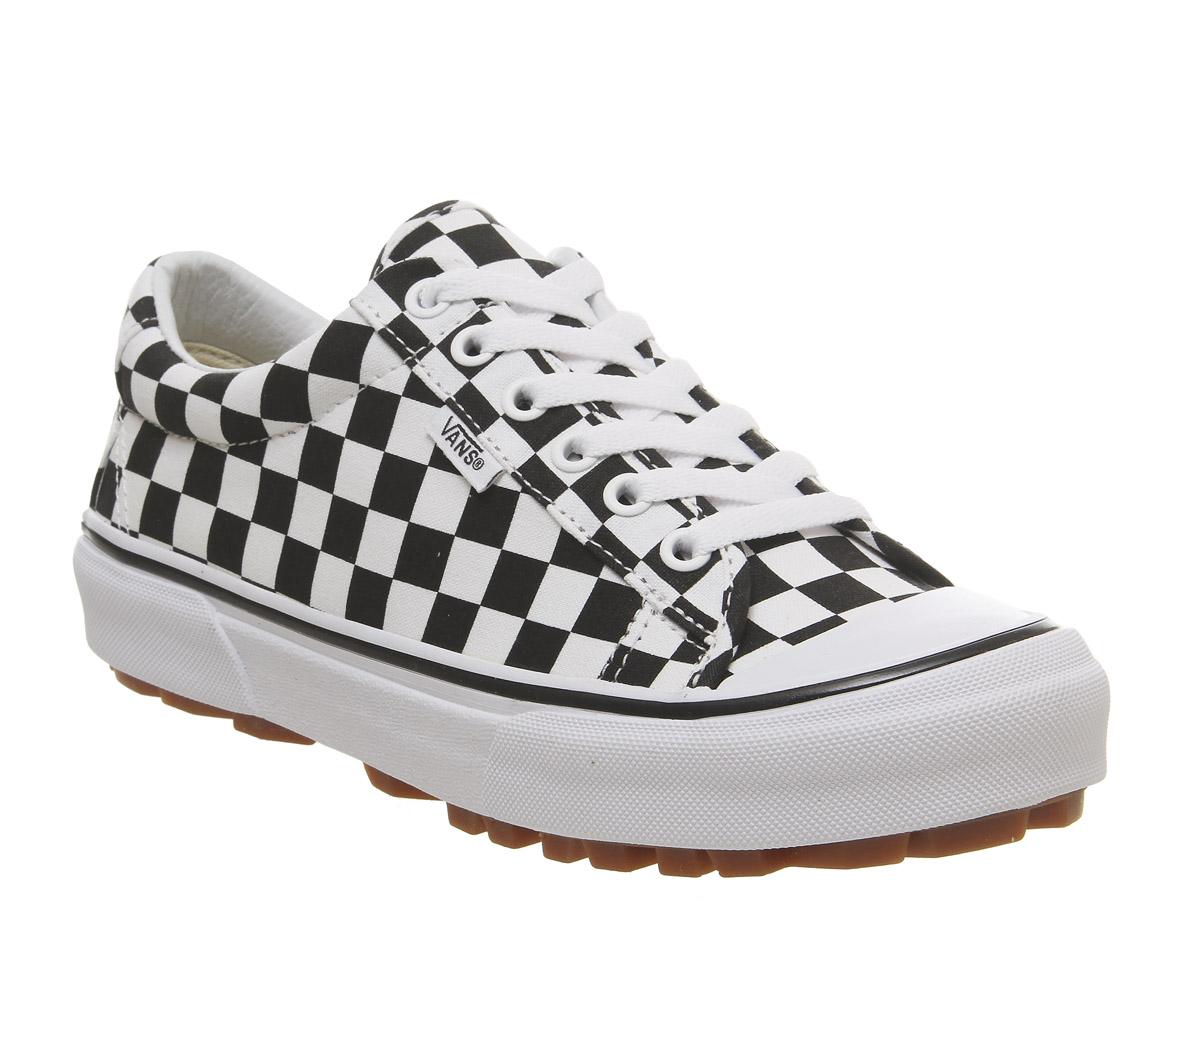 vans style 29 checkerboard & true white womens shoes